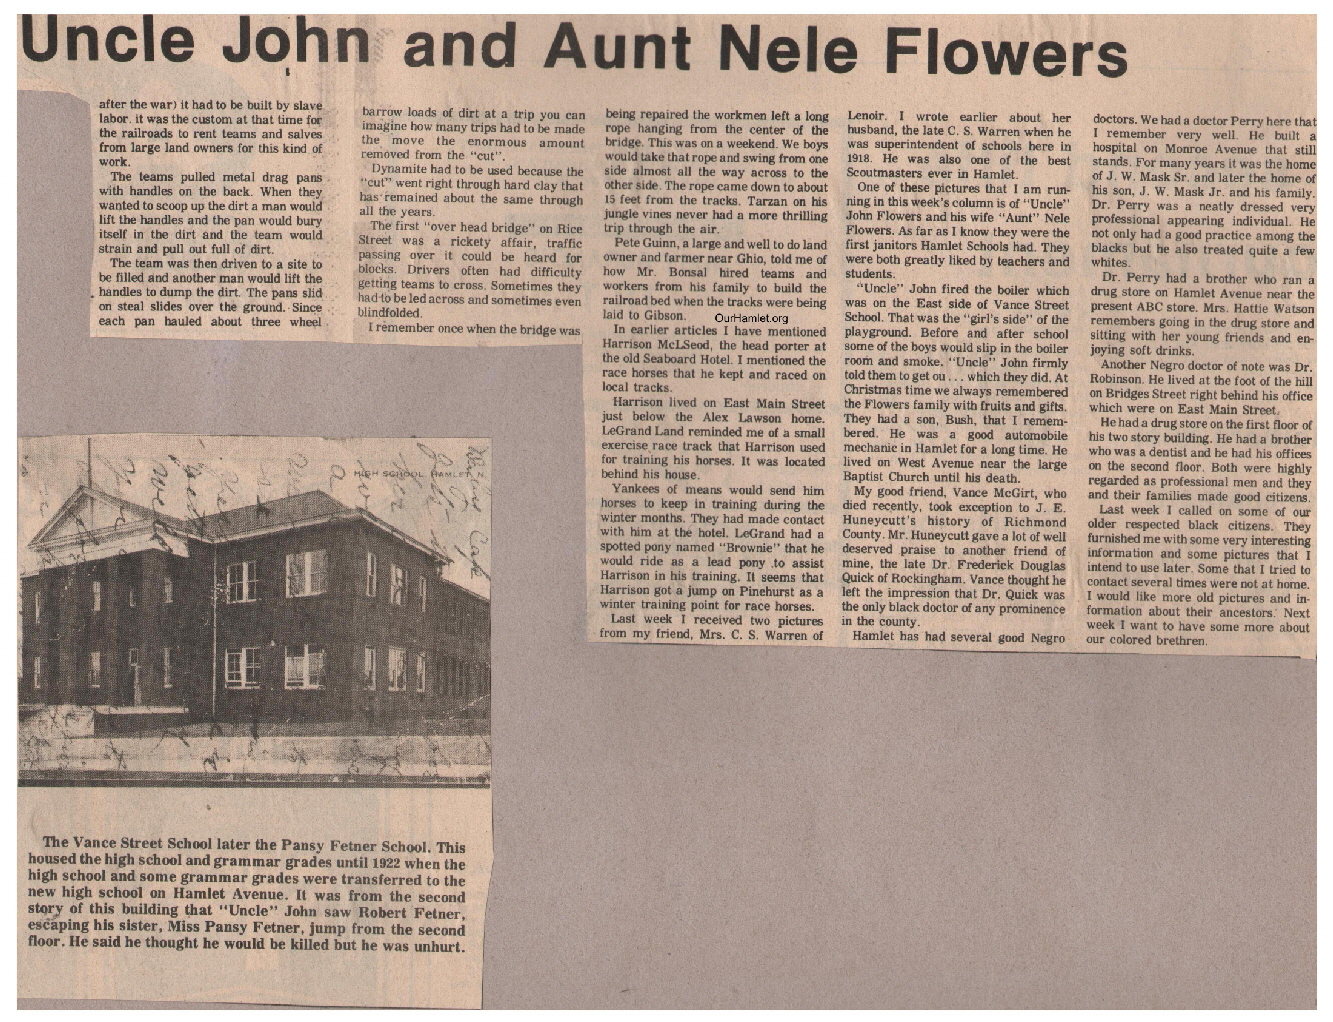 The Squire - Uncle John and Aunt Nele Flowers b OH